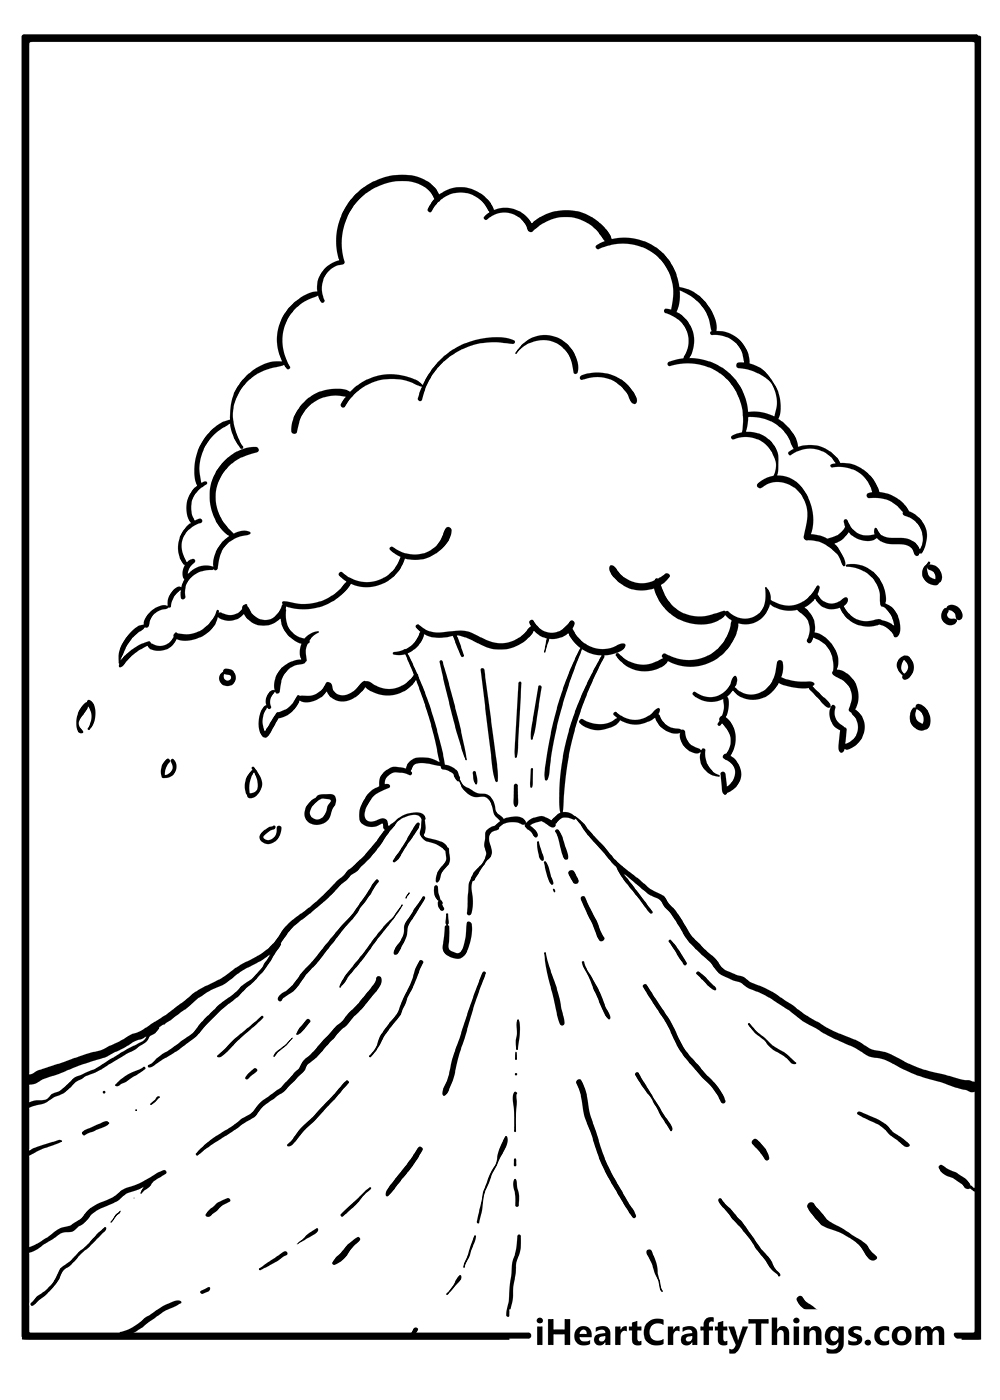 Volcano Coloring Pages for adults free printable